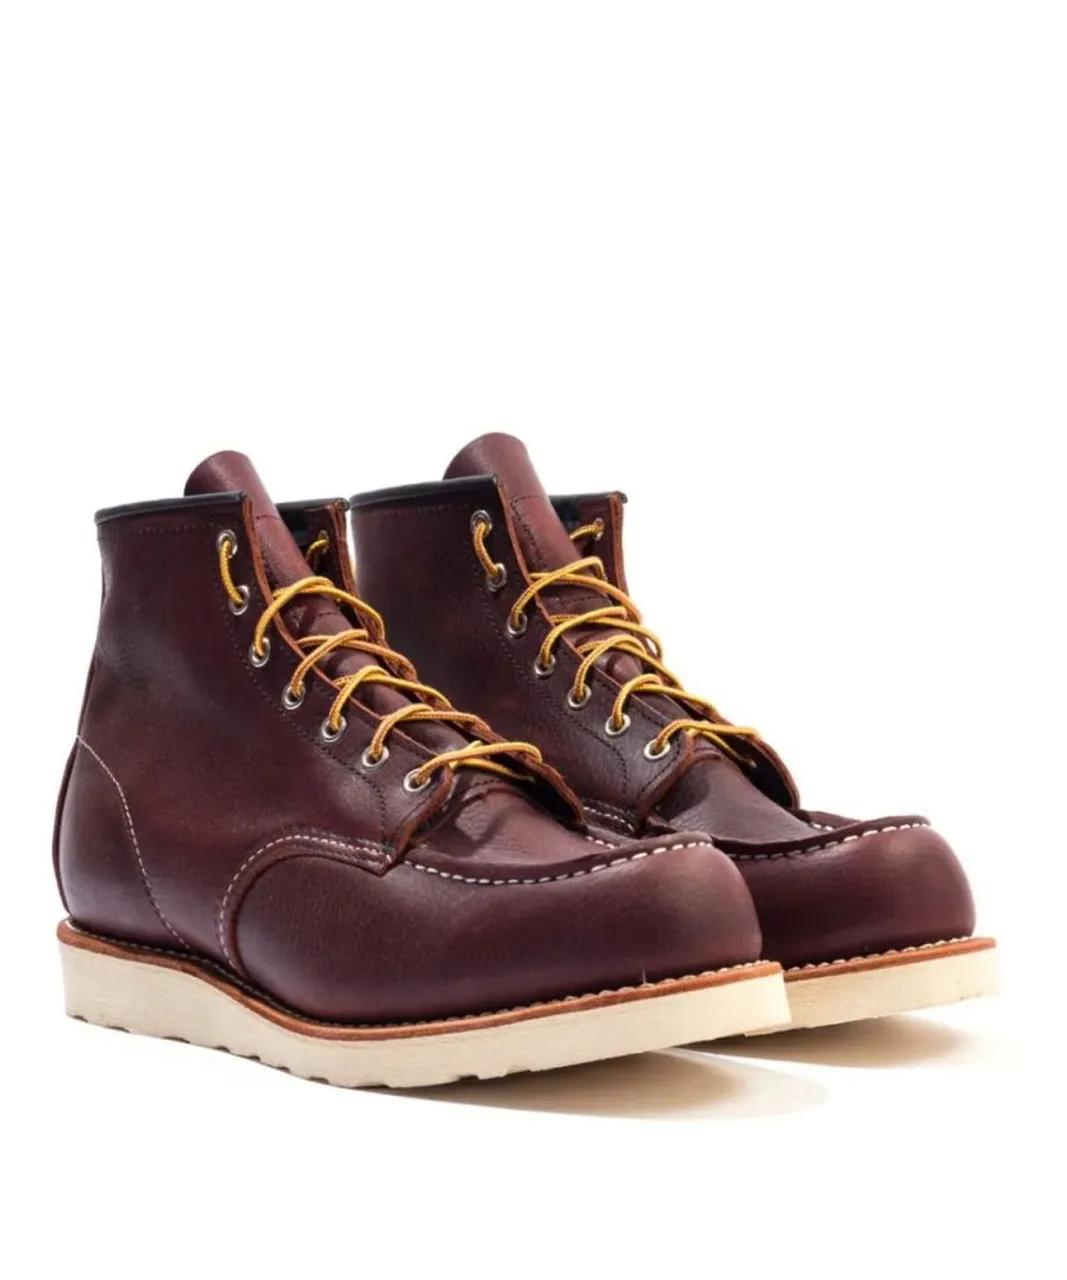 Red Wing Mens 8138 Classic Moc Toe Leather Boots in Brown